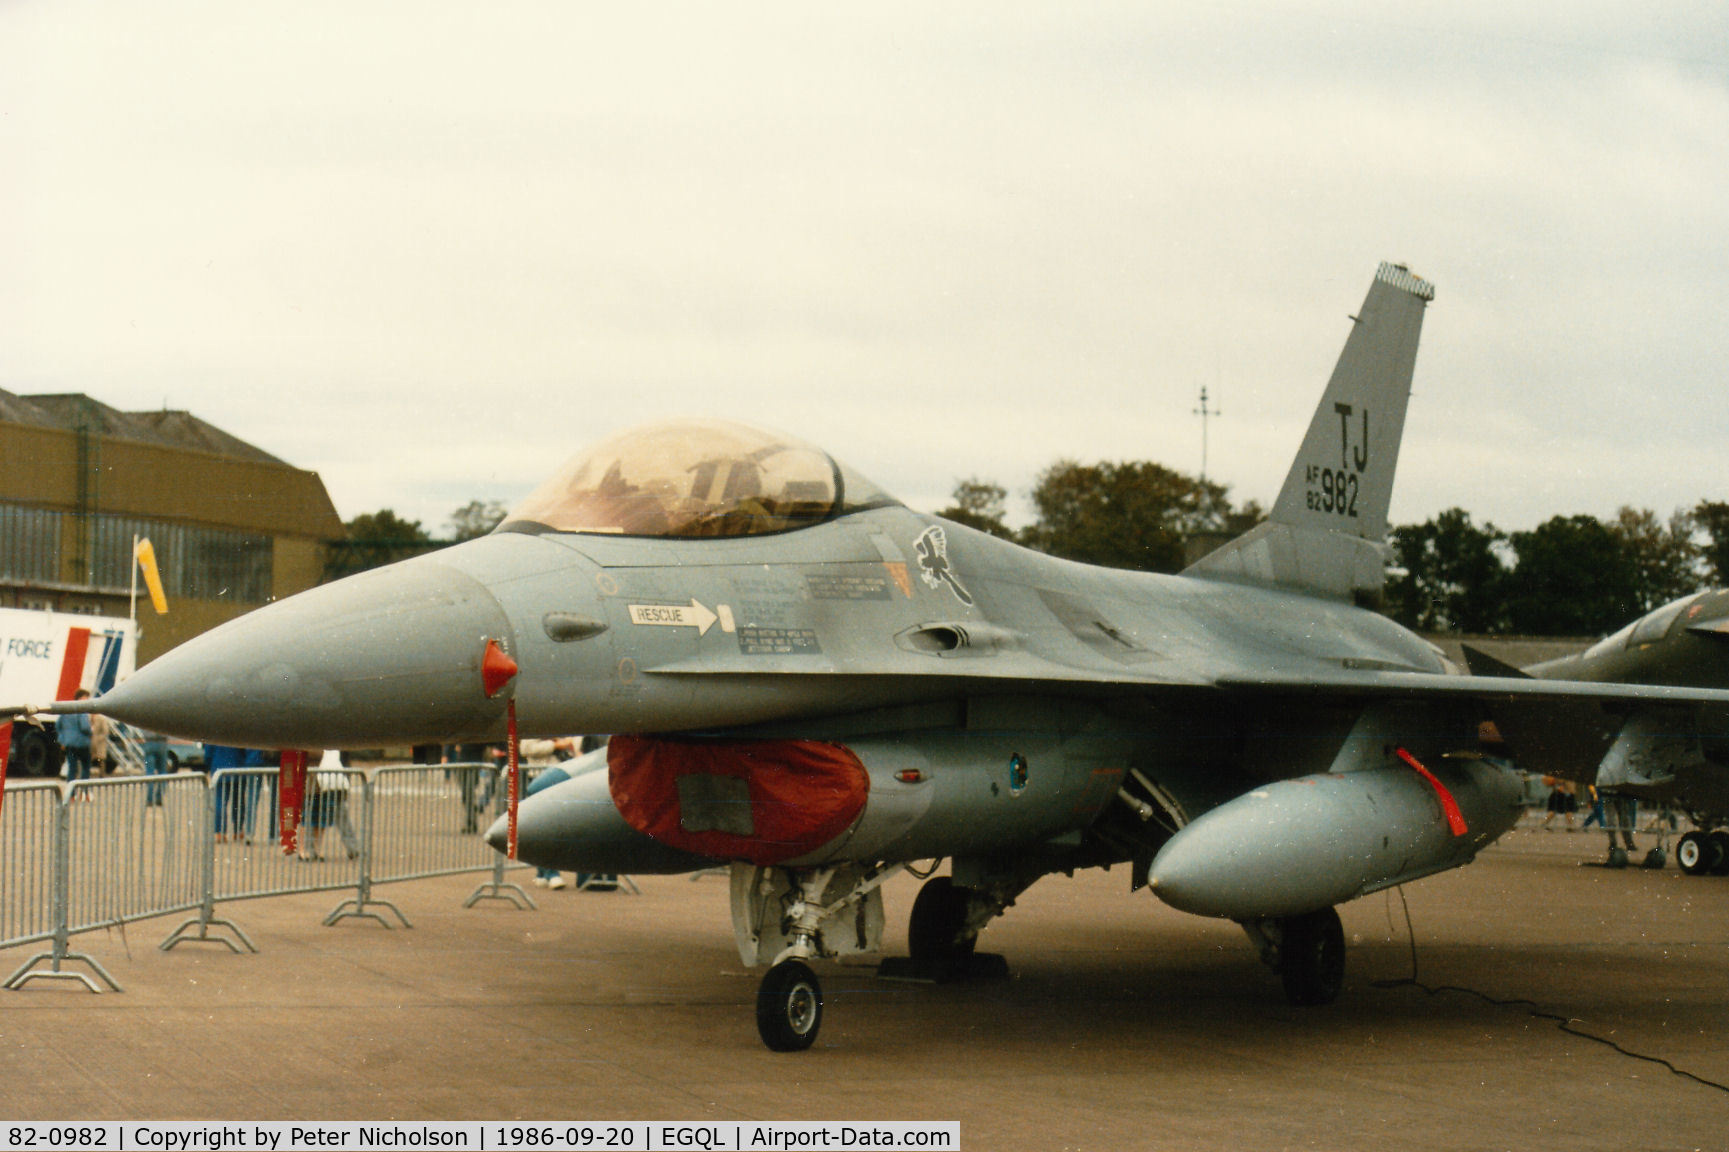 82-0982, 1982 General Dynamics F-16A Fighting Falcon C/N 61-575, F-16A Falcon of 612th Tactical Fighter Squadron/401st Tactical Fighter Wing based at Torrejon on display at the 1986 RAF Leuchars Airshow.